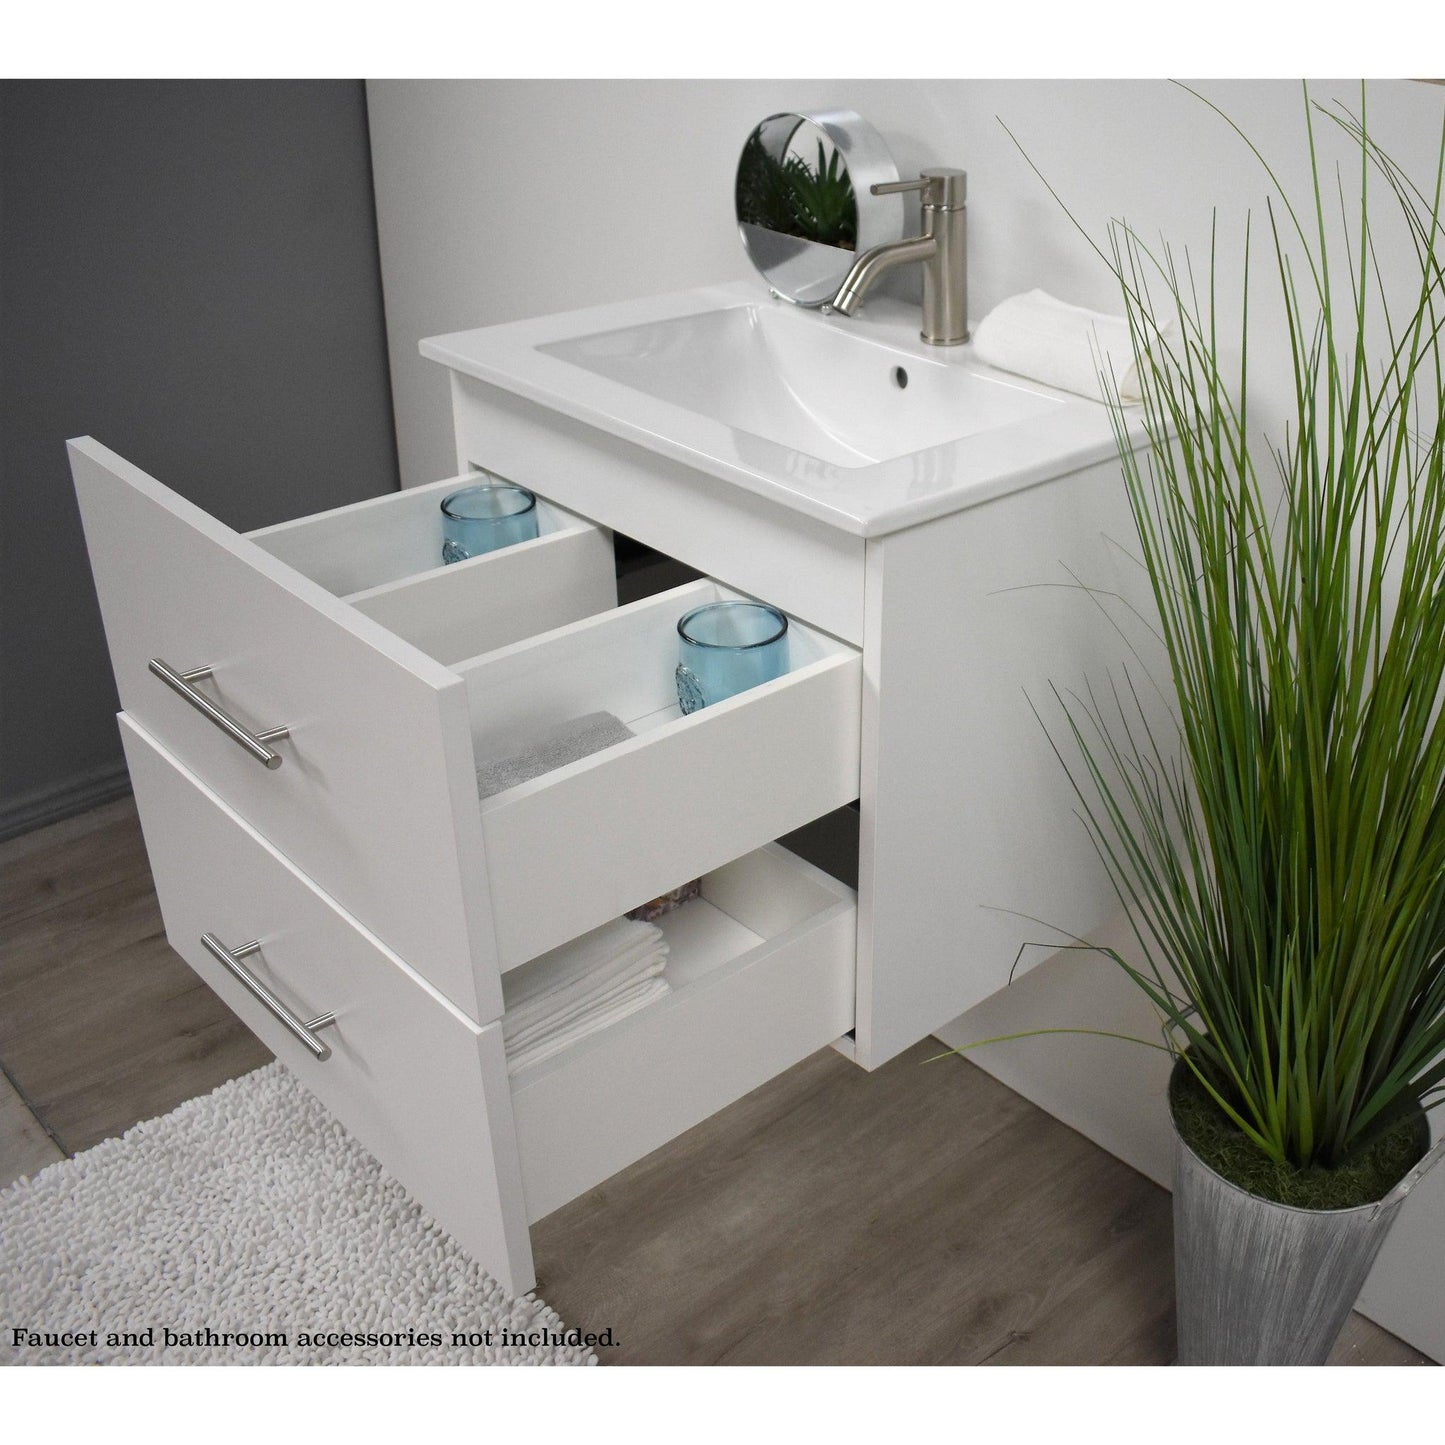 Volpa USA Napa 24" White Wall-Mounted Floating Modern Bathroom Vanity With Integrated Ceramic Top and Satin Nickel Round Handles